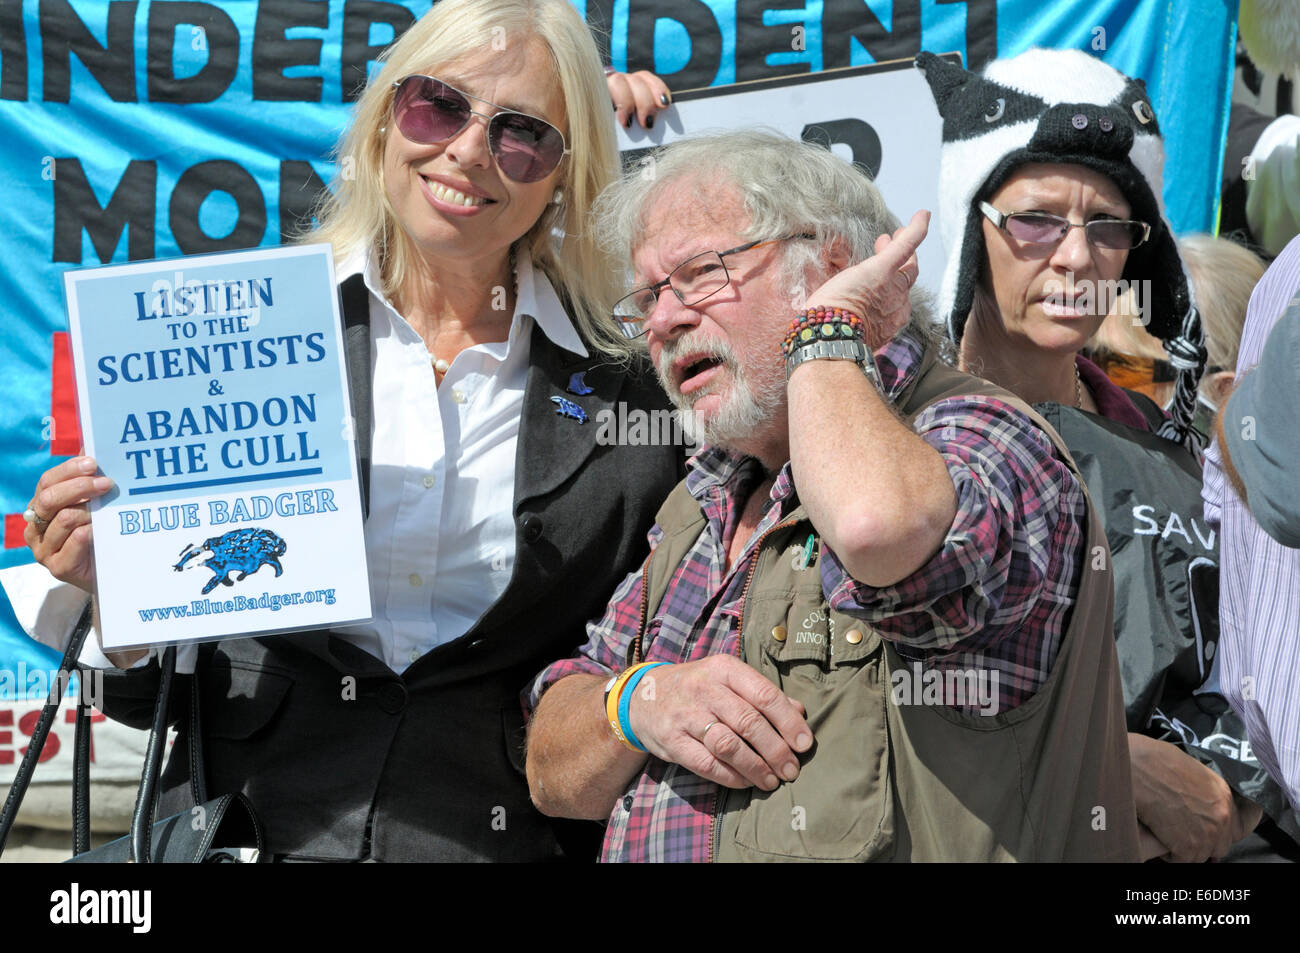 London, UK. 21st August, 2014. Lorraine Platt MP (conservative) and Bill Oddie protesters outside the High Court in London as the Badger Trust seek a Judicial Review challenge against the DEFRA Secretary of State Liz Truss and Natural England on the Government's highly controversial badger cull policy. Stock Photo